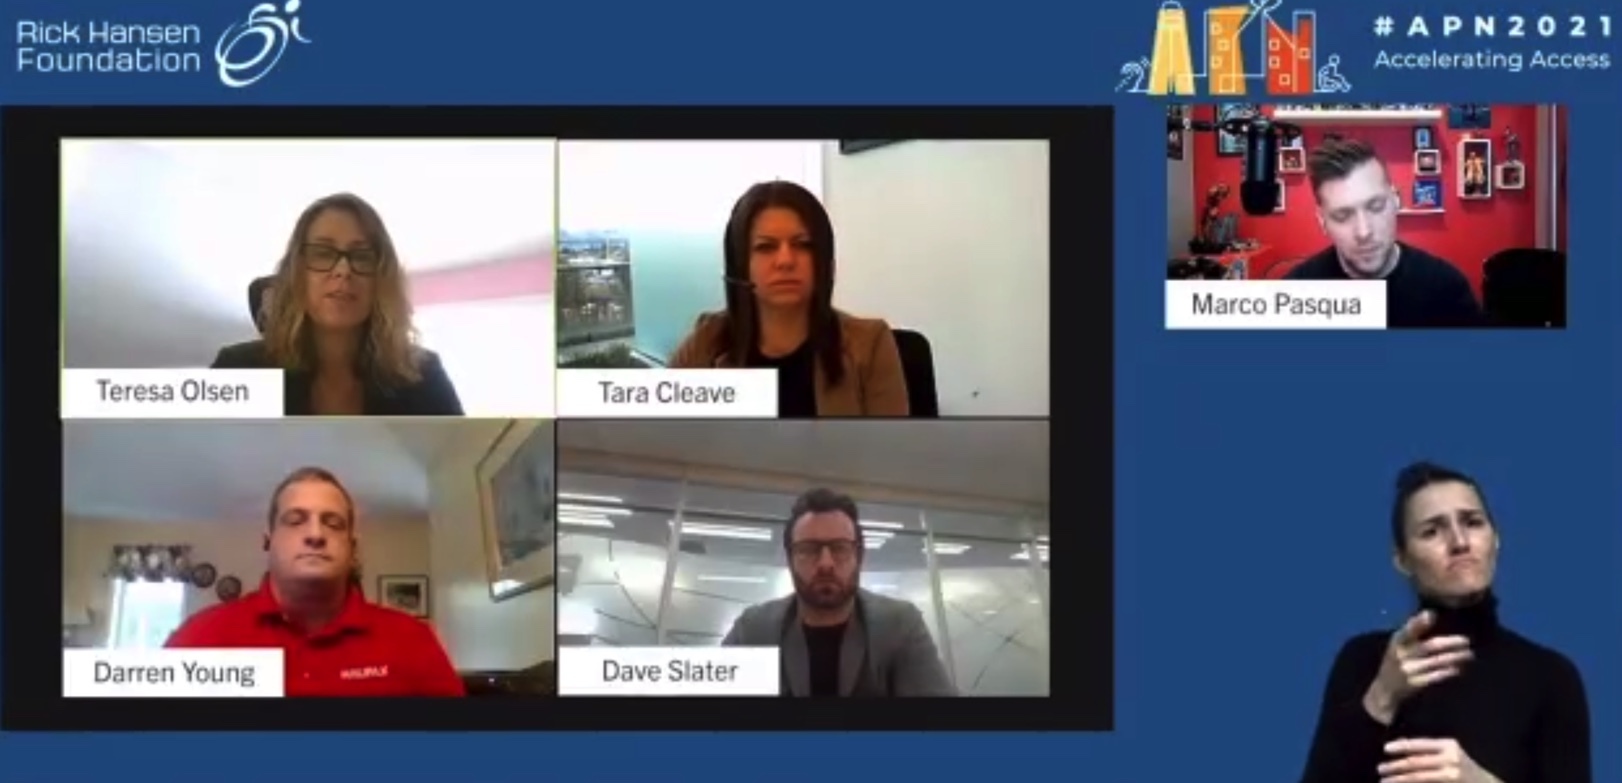 Screenshot of #APN2021 online conference session featuring Teresa Olsen, Tara Cleave, Darren Young, Dave Slater, and Marco Pasqua.